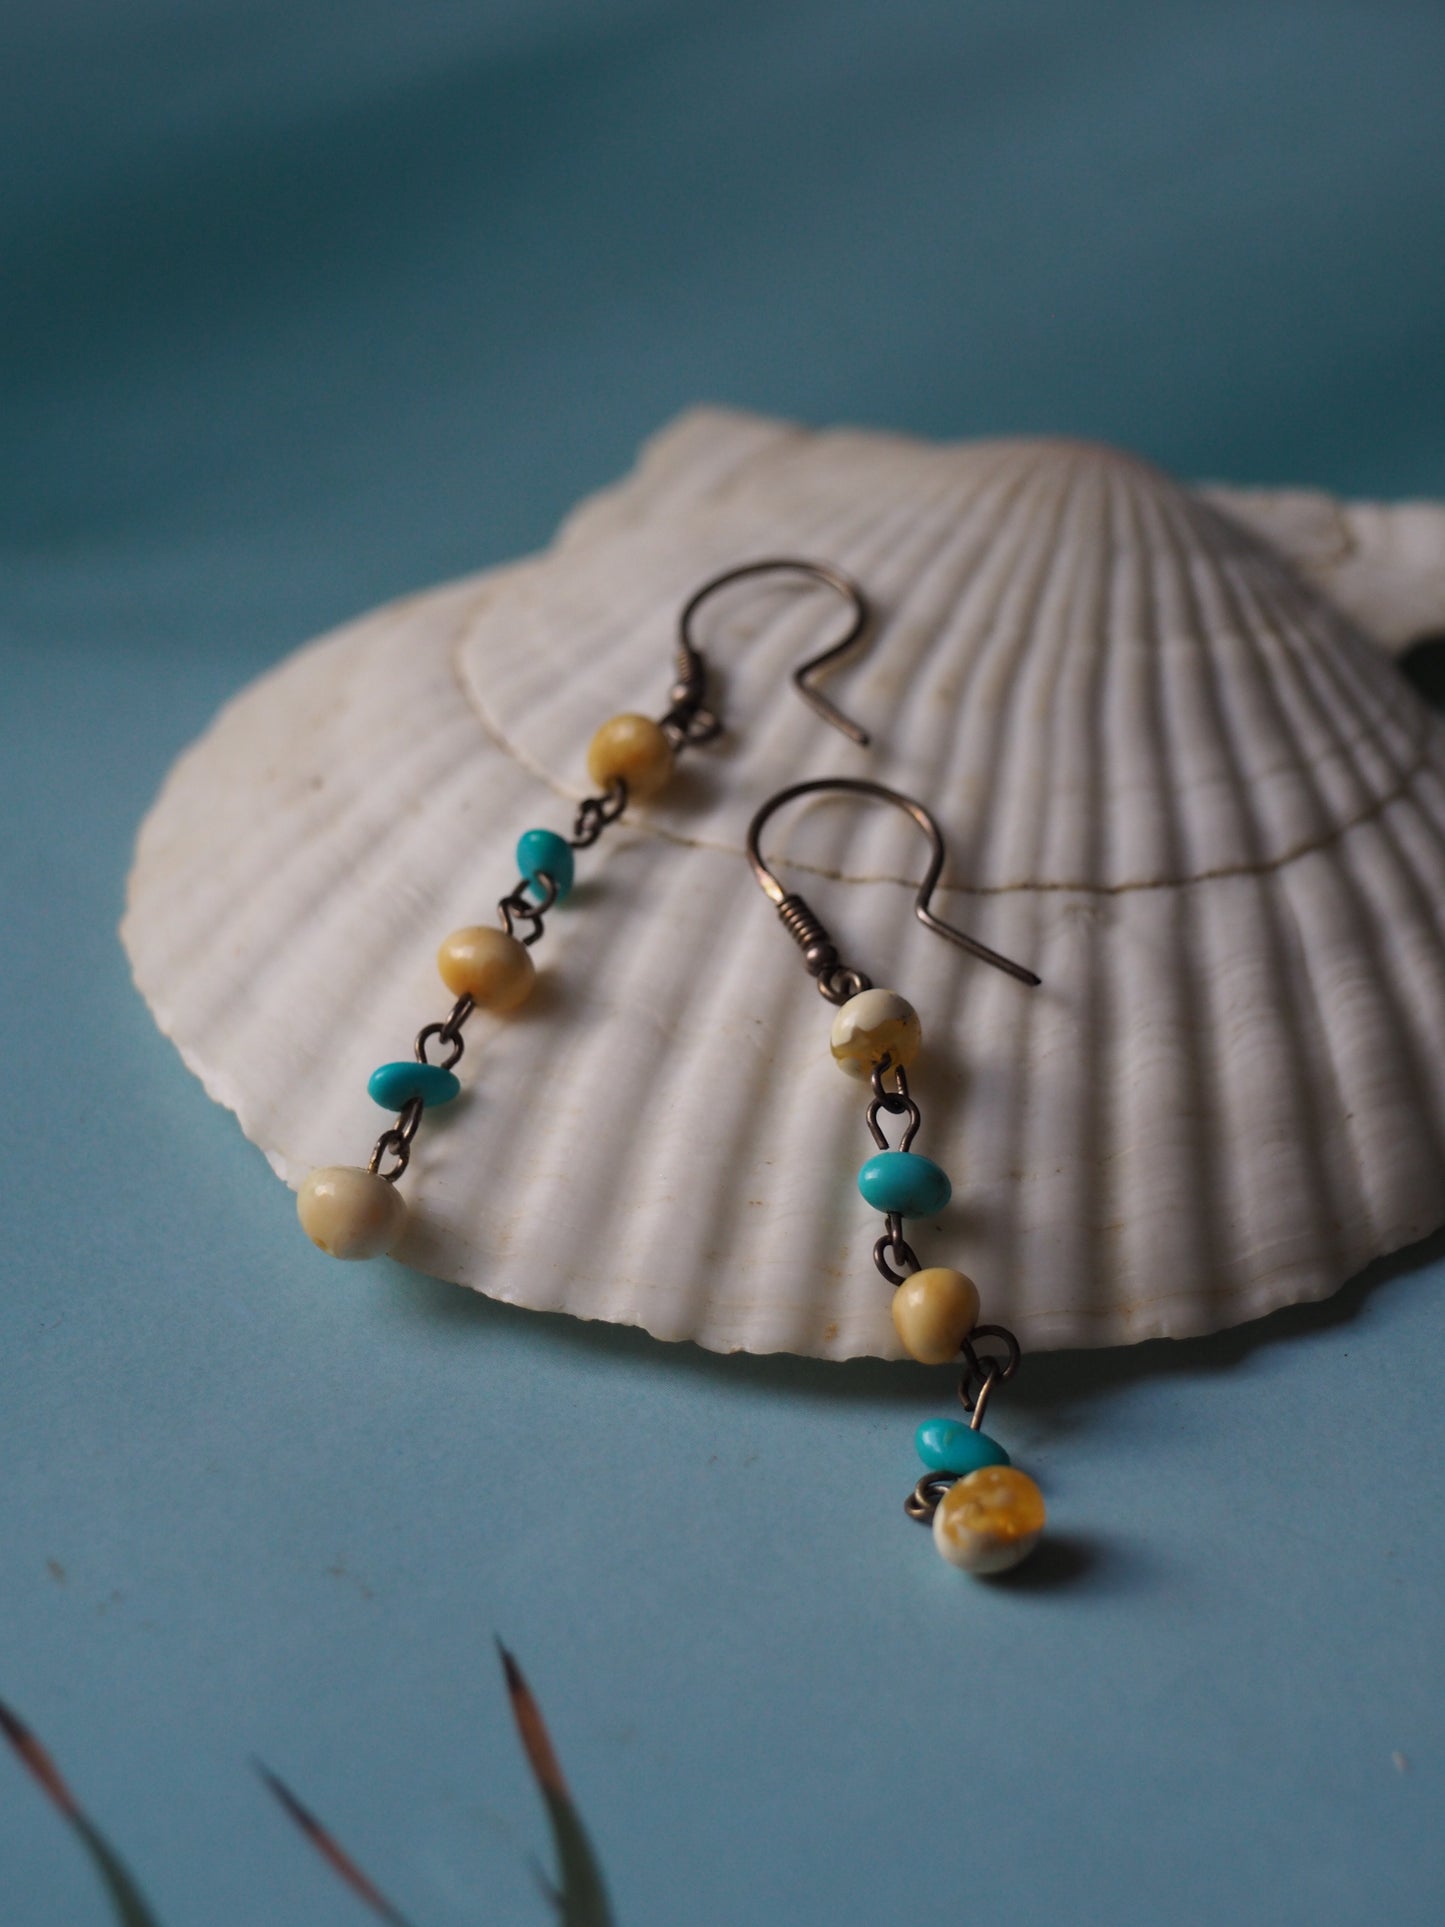 White Amber and Turquoise Stone Drop Earrings